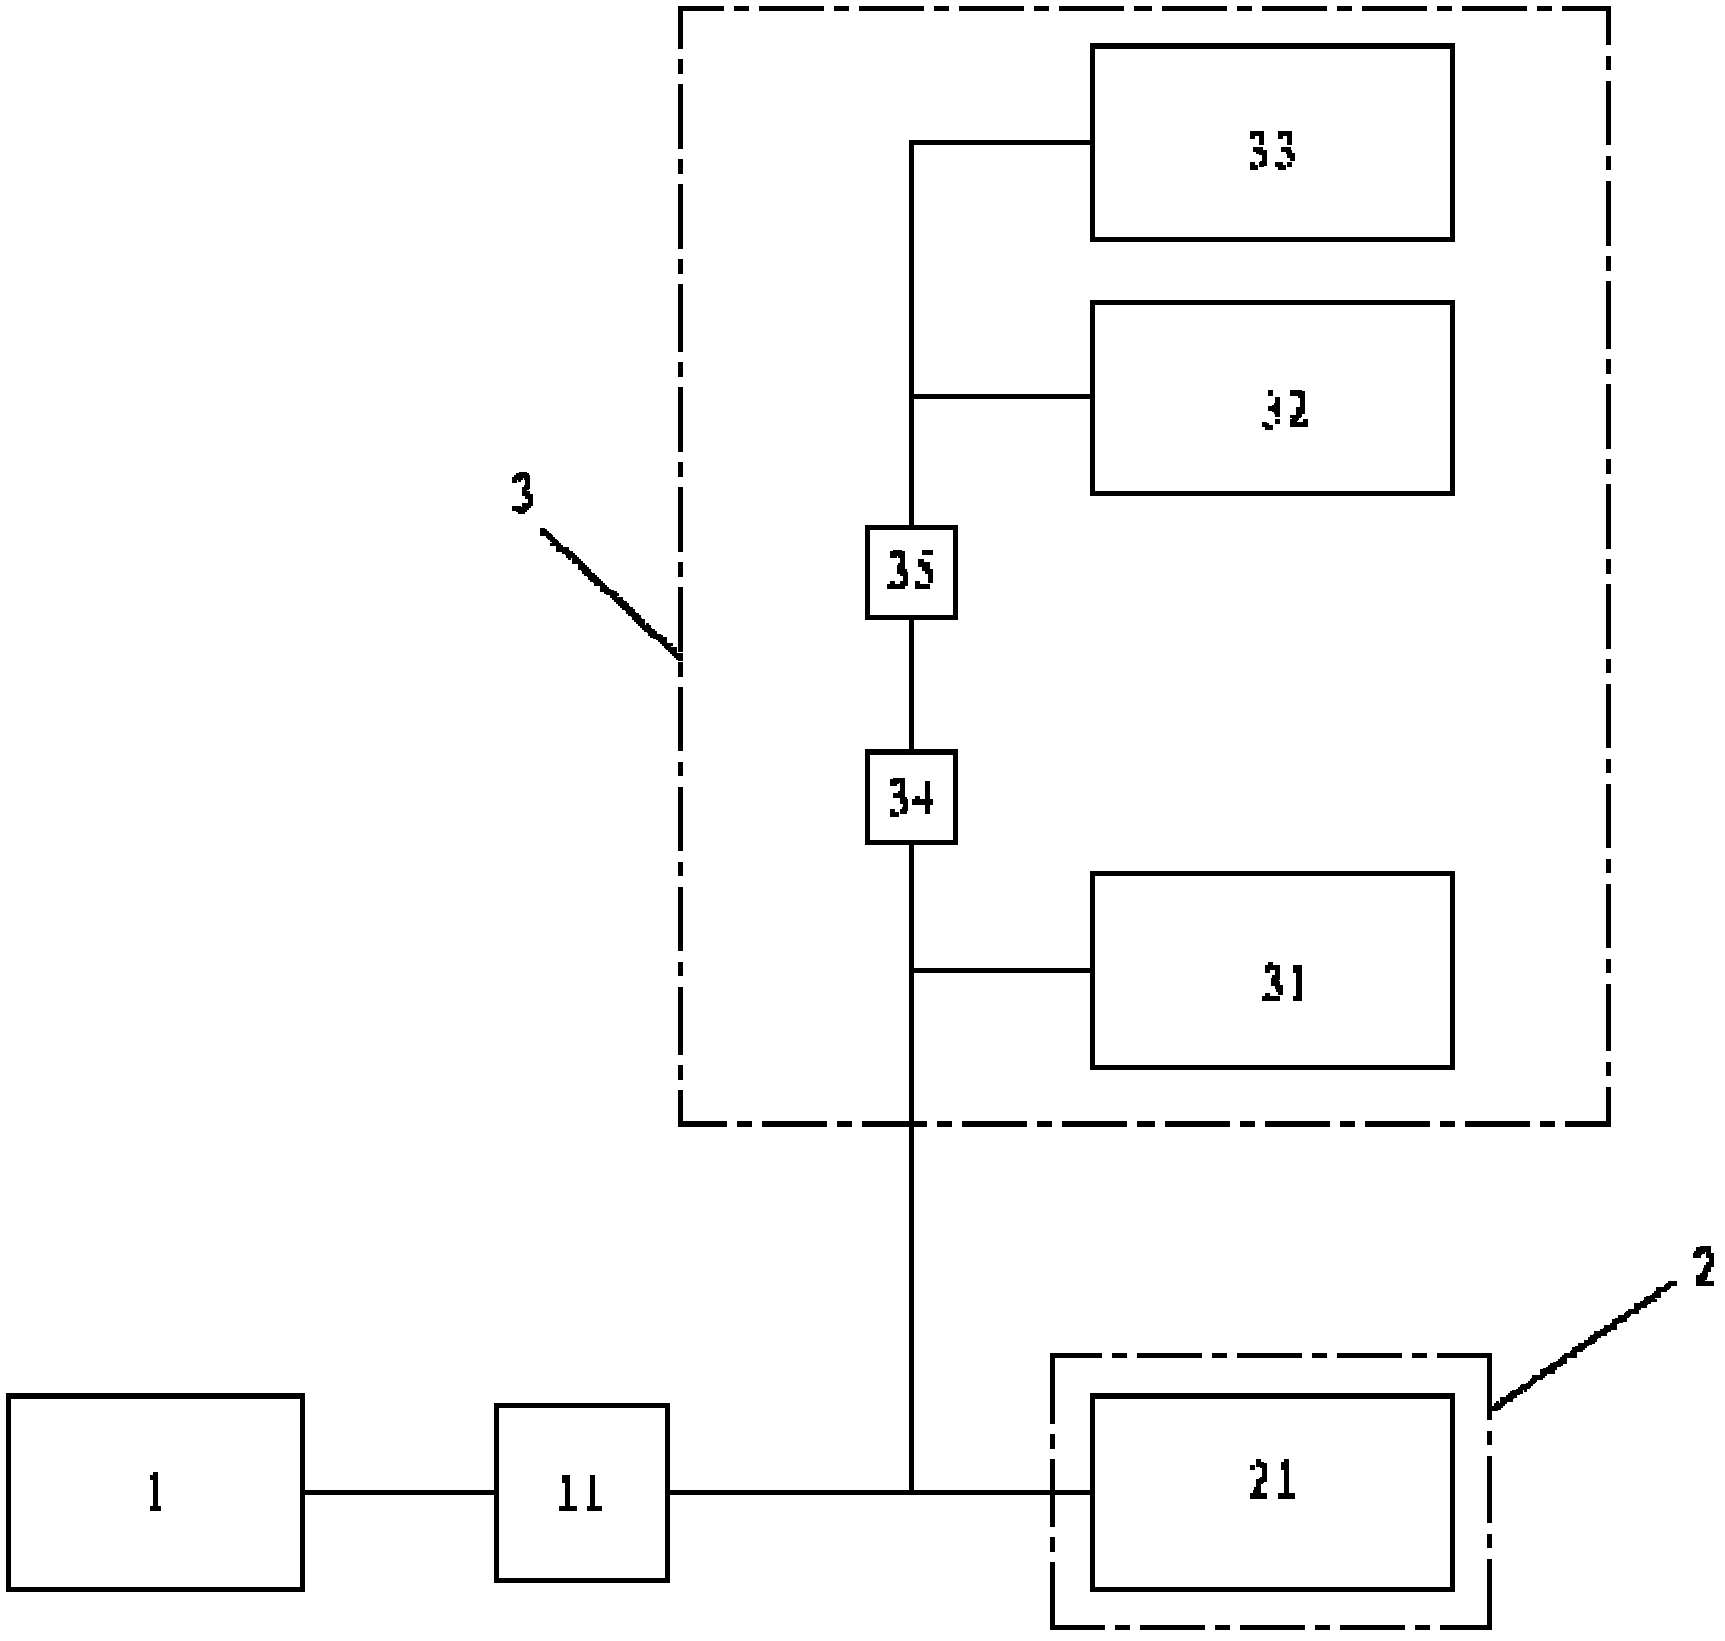 Fan electric control system and fan converter integrated control topology